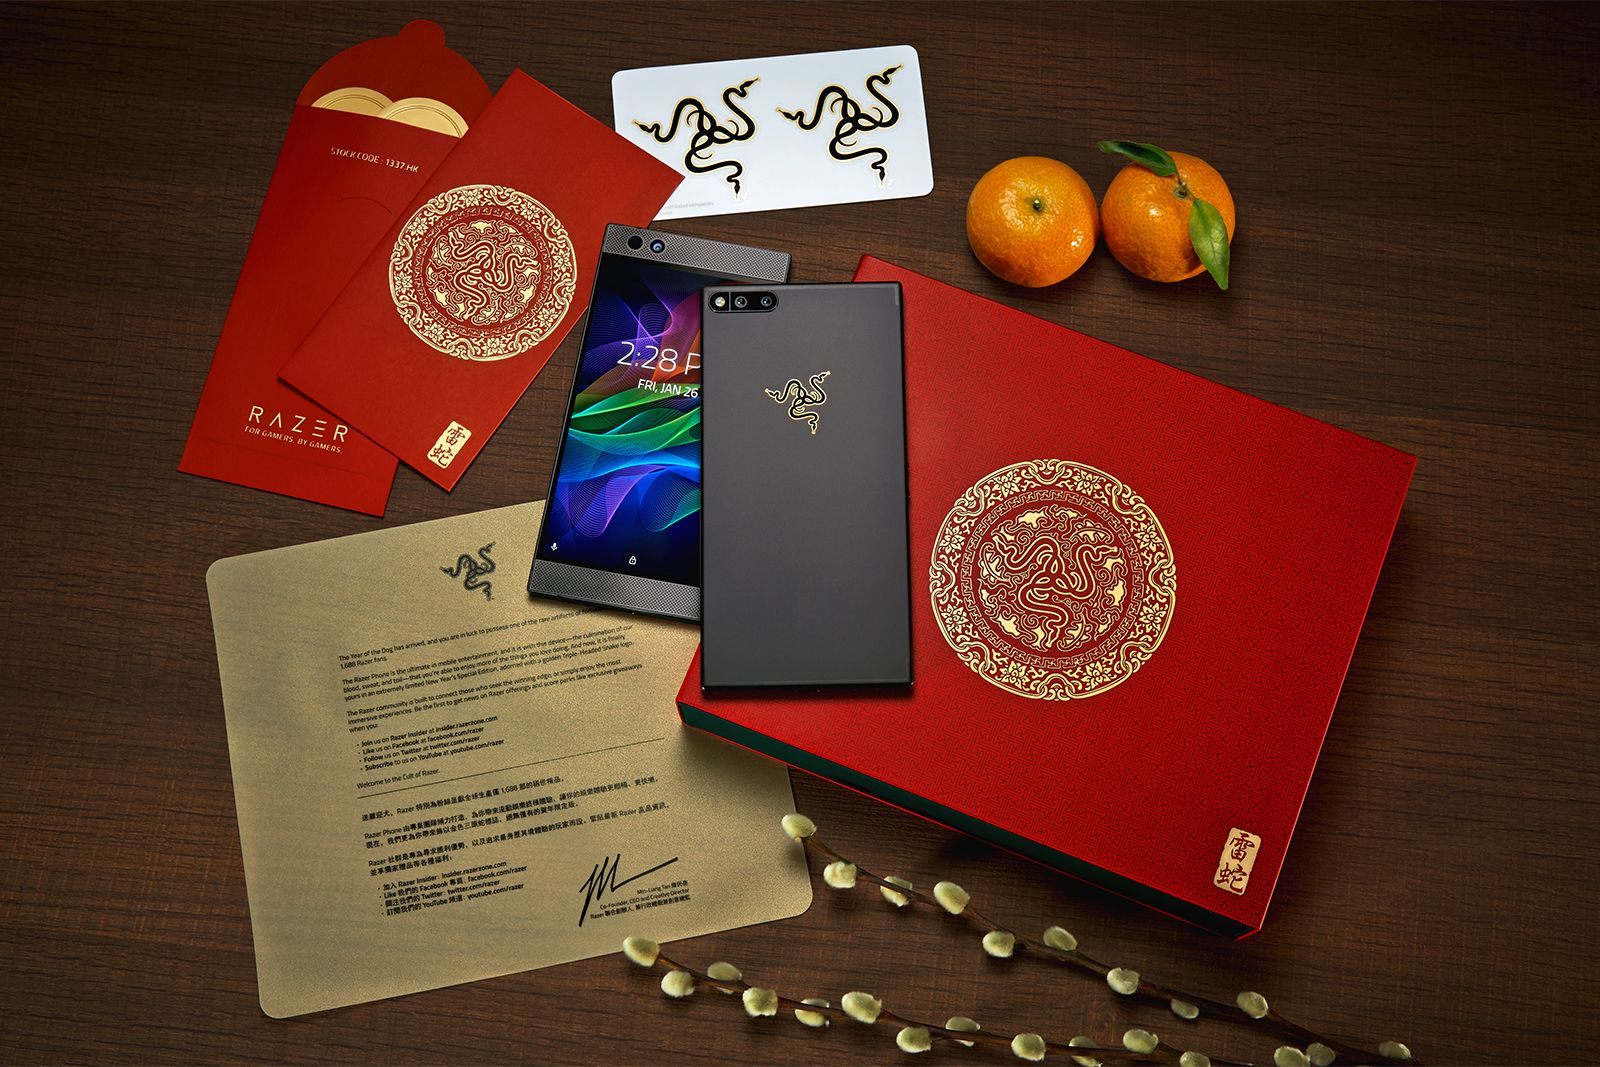 Special 2018 Gold Edition Razer Phone available in very limited run image 1